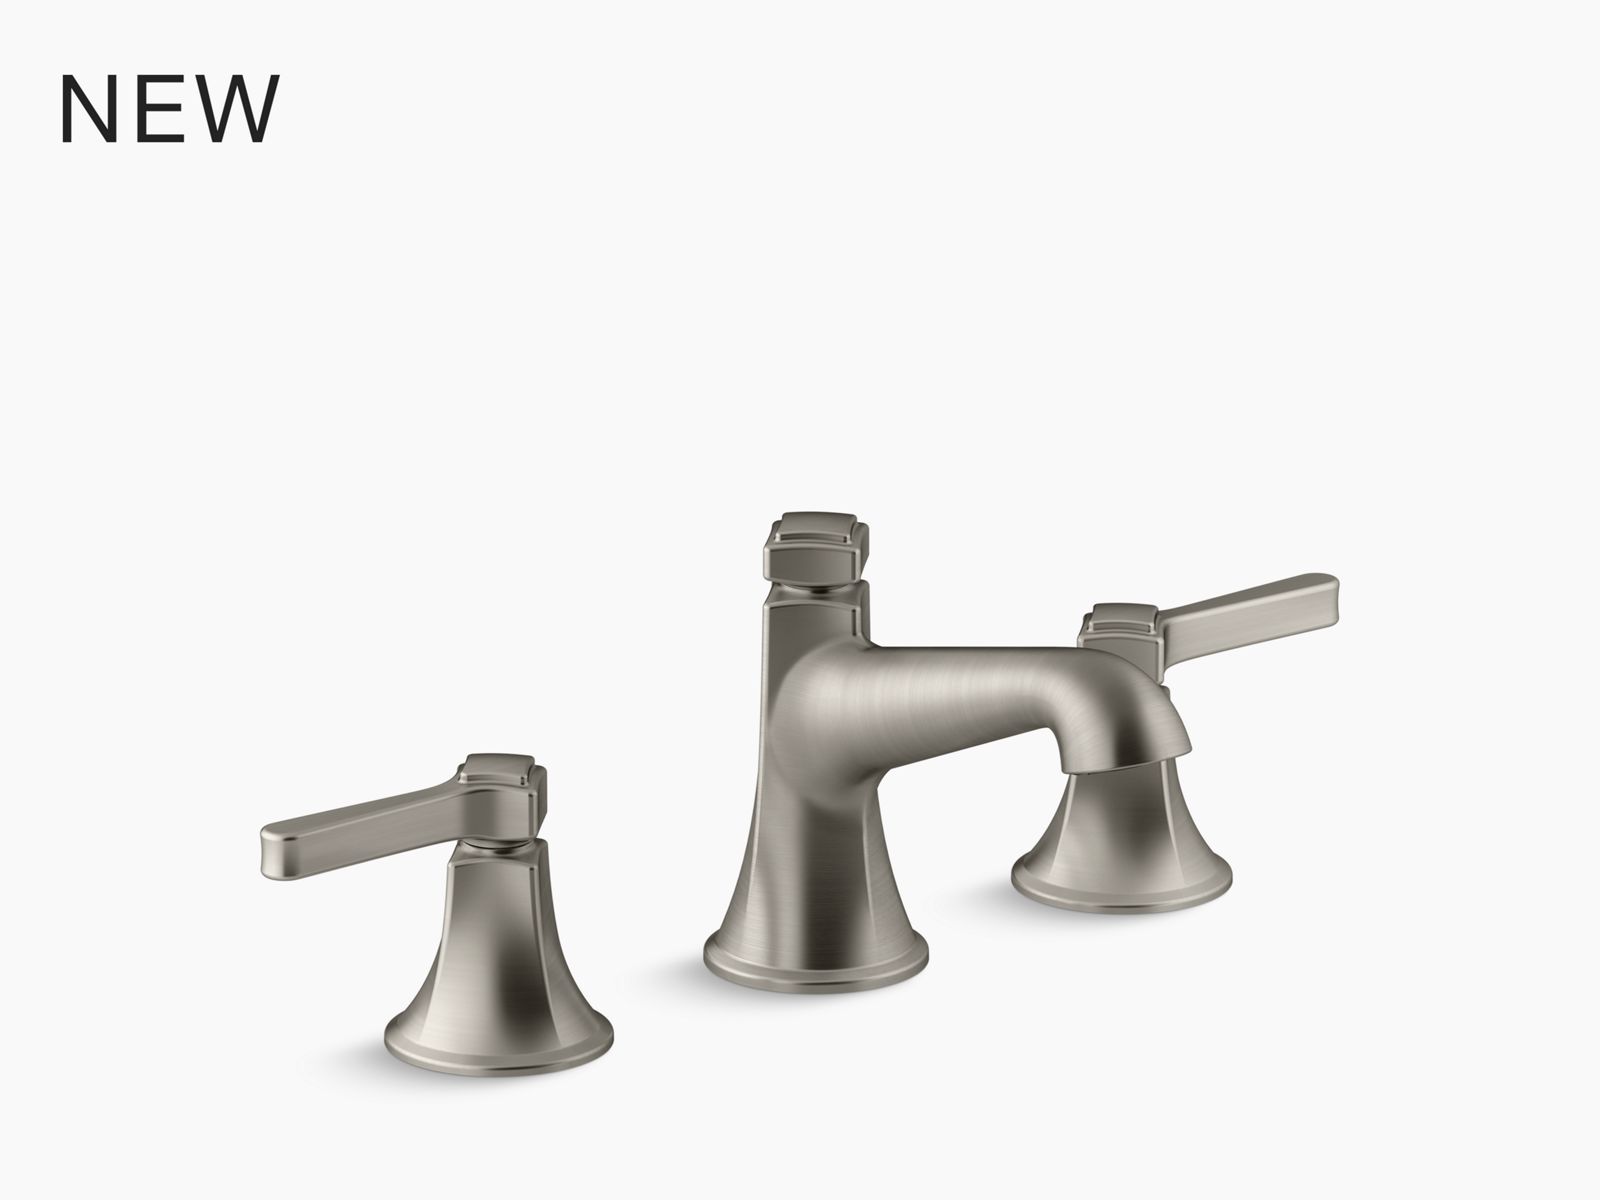 Taut Cold Water Swing Spout Kitchen Faucet